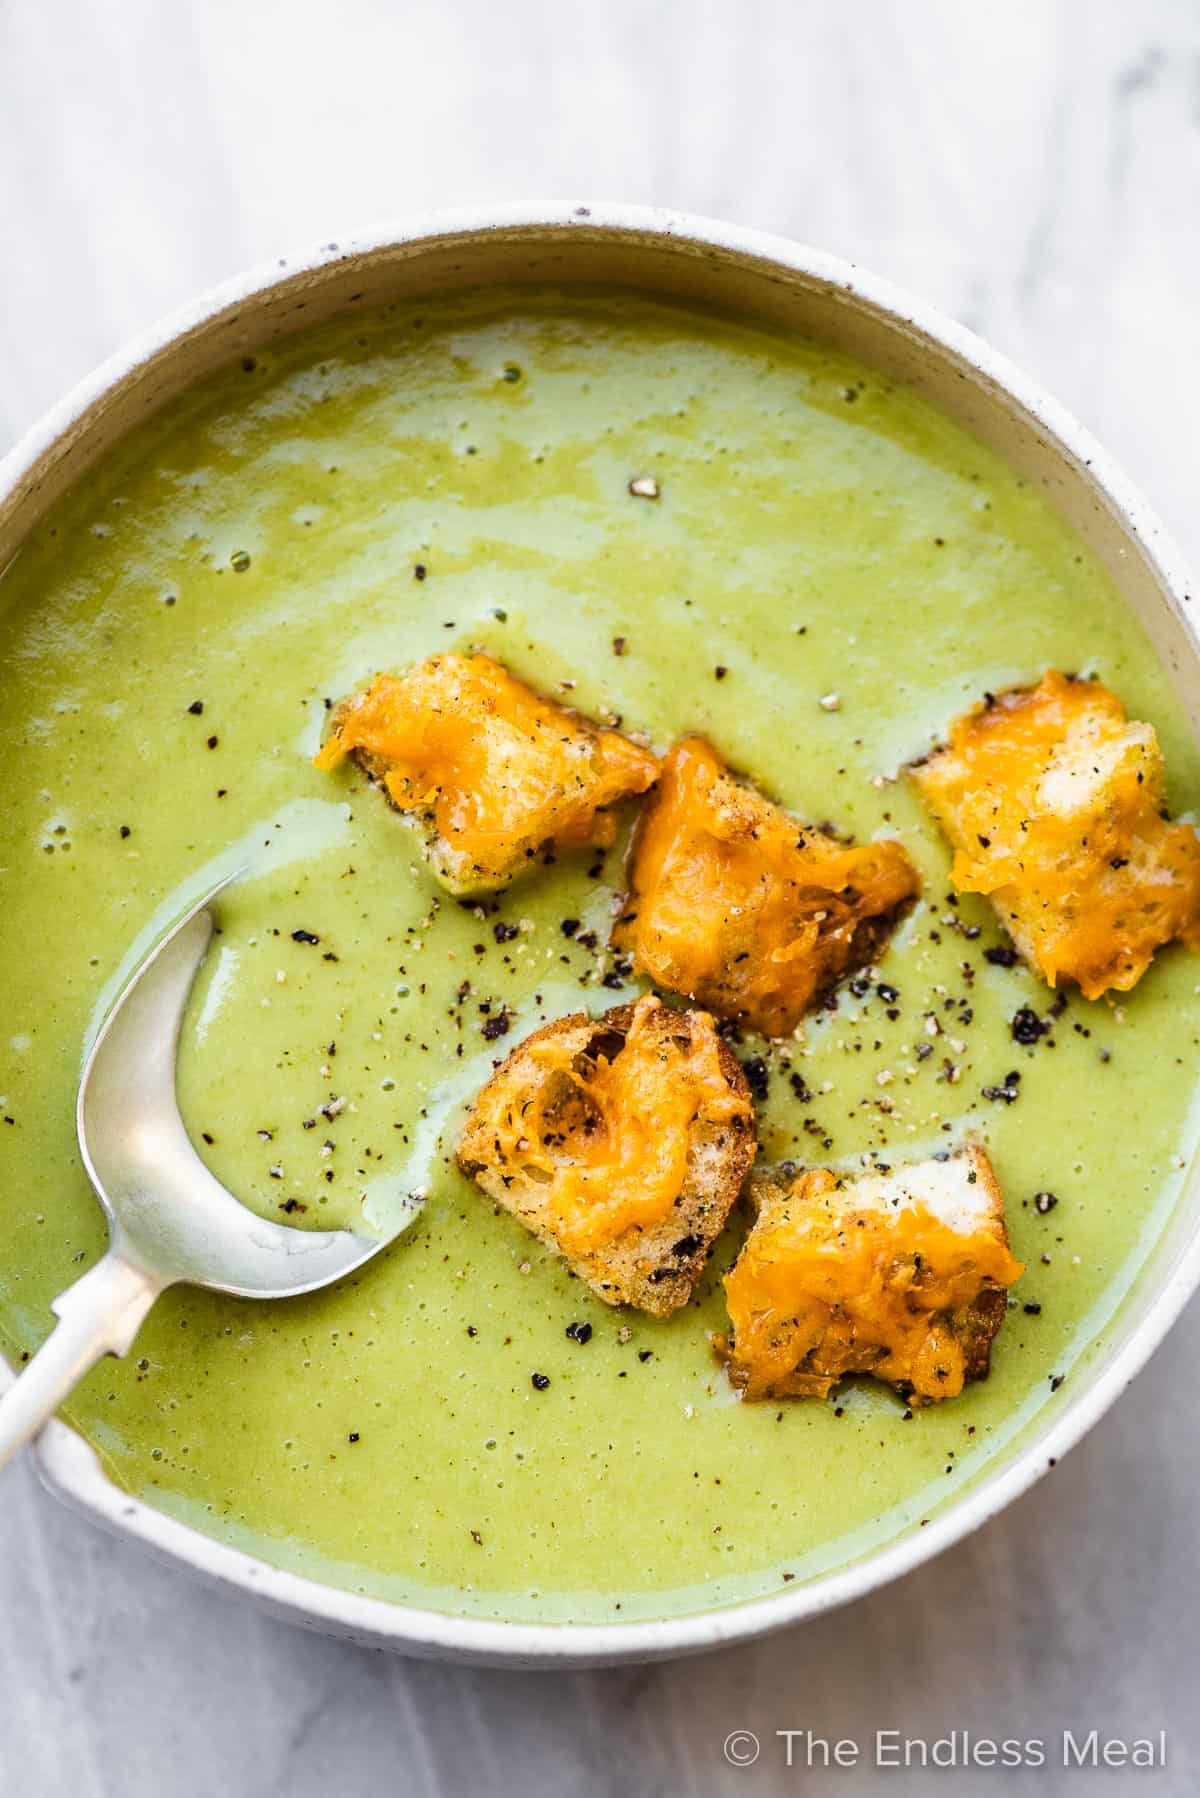 A spoon taking a scoop of asparagus soup from a white bowl topped with croutons.